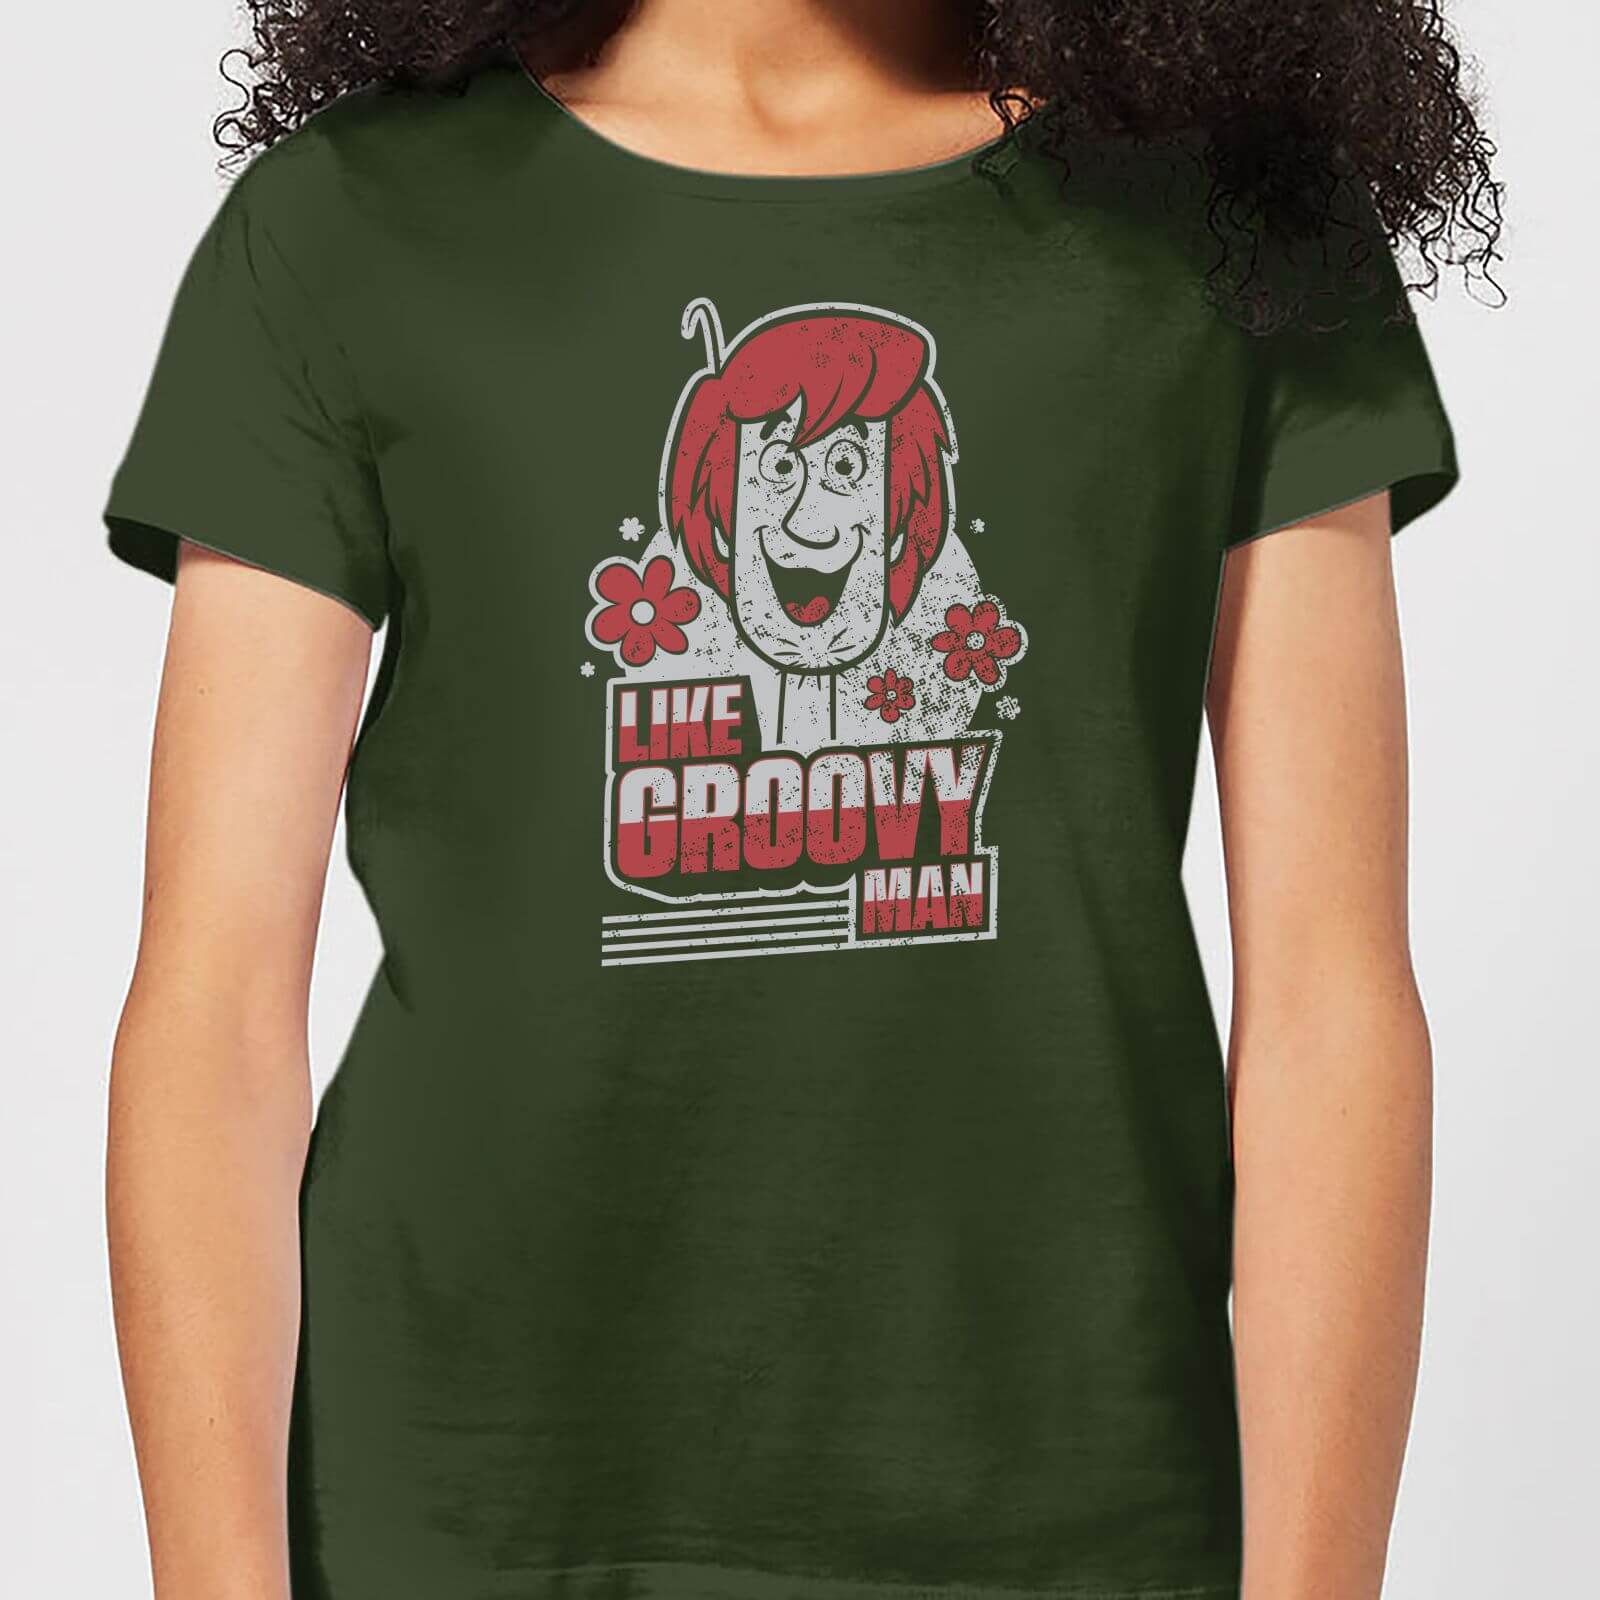 Scooby Doo Like, Groovy Man Women's T-Shirt - Forest Green - S - Forest Green